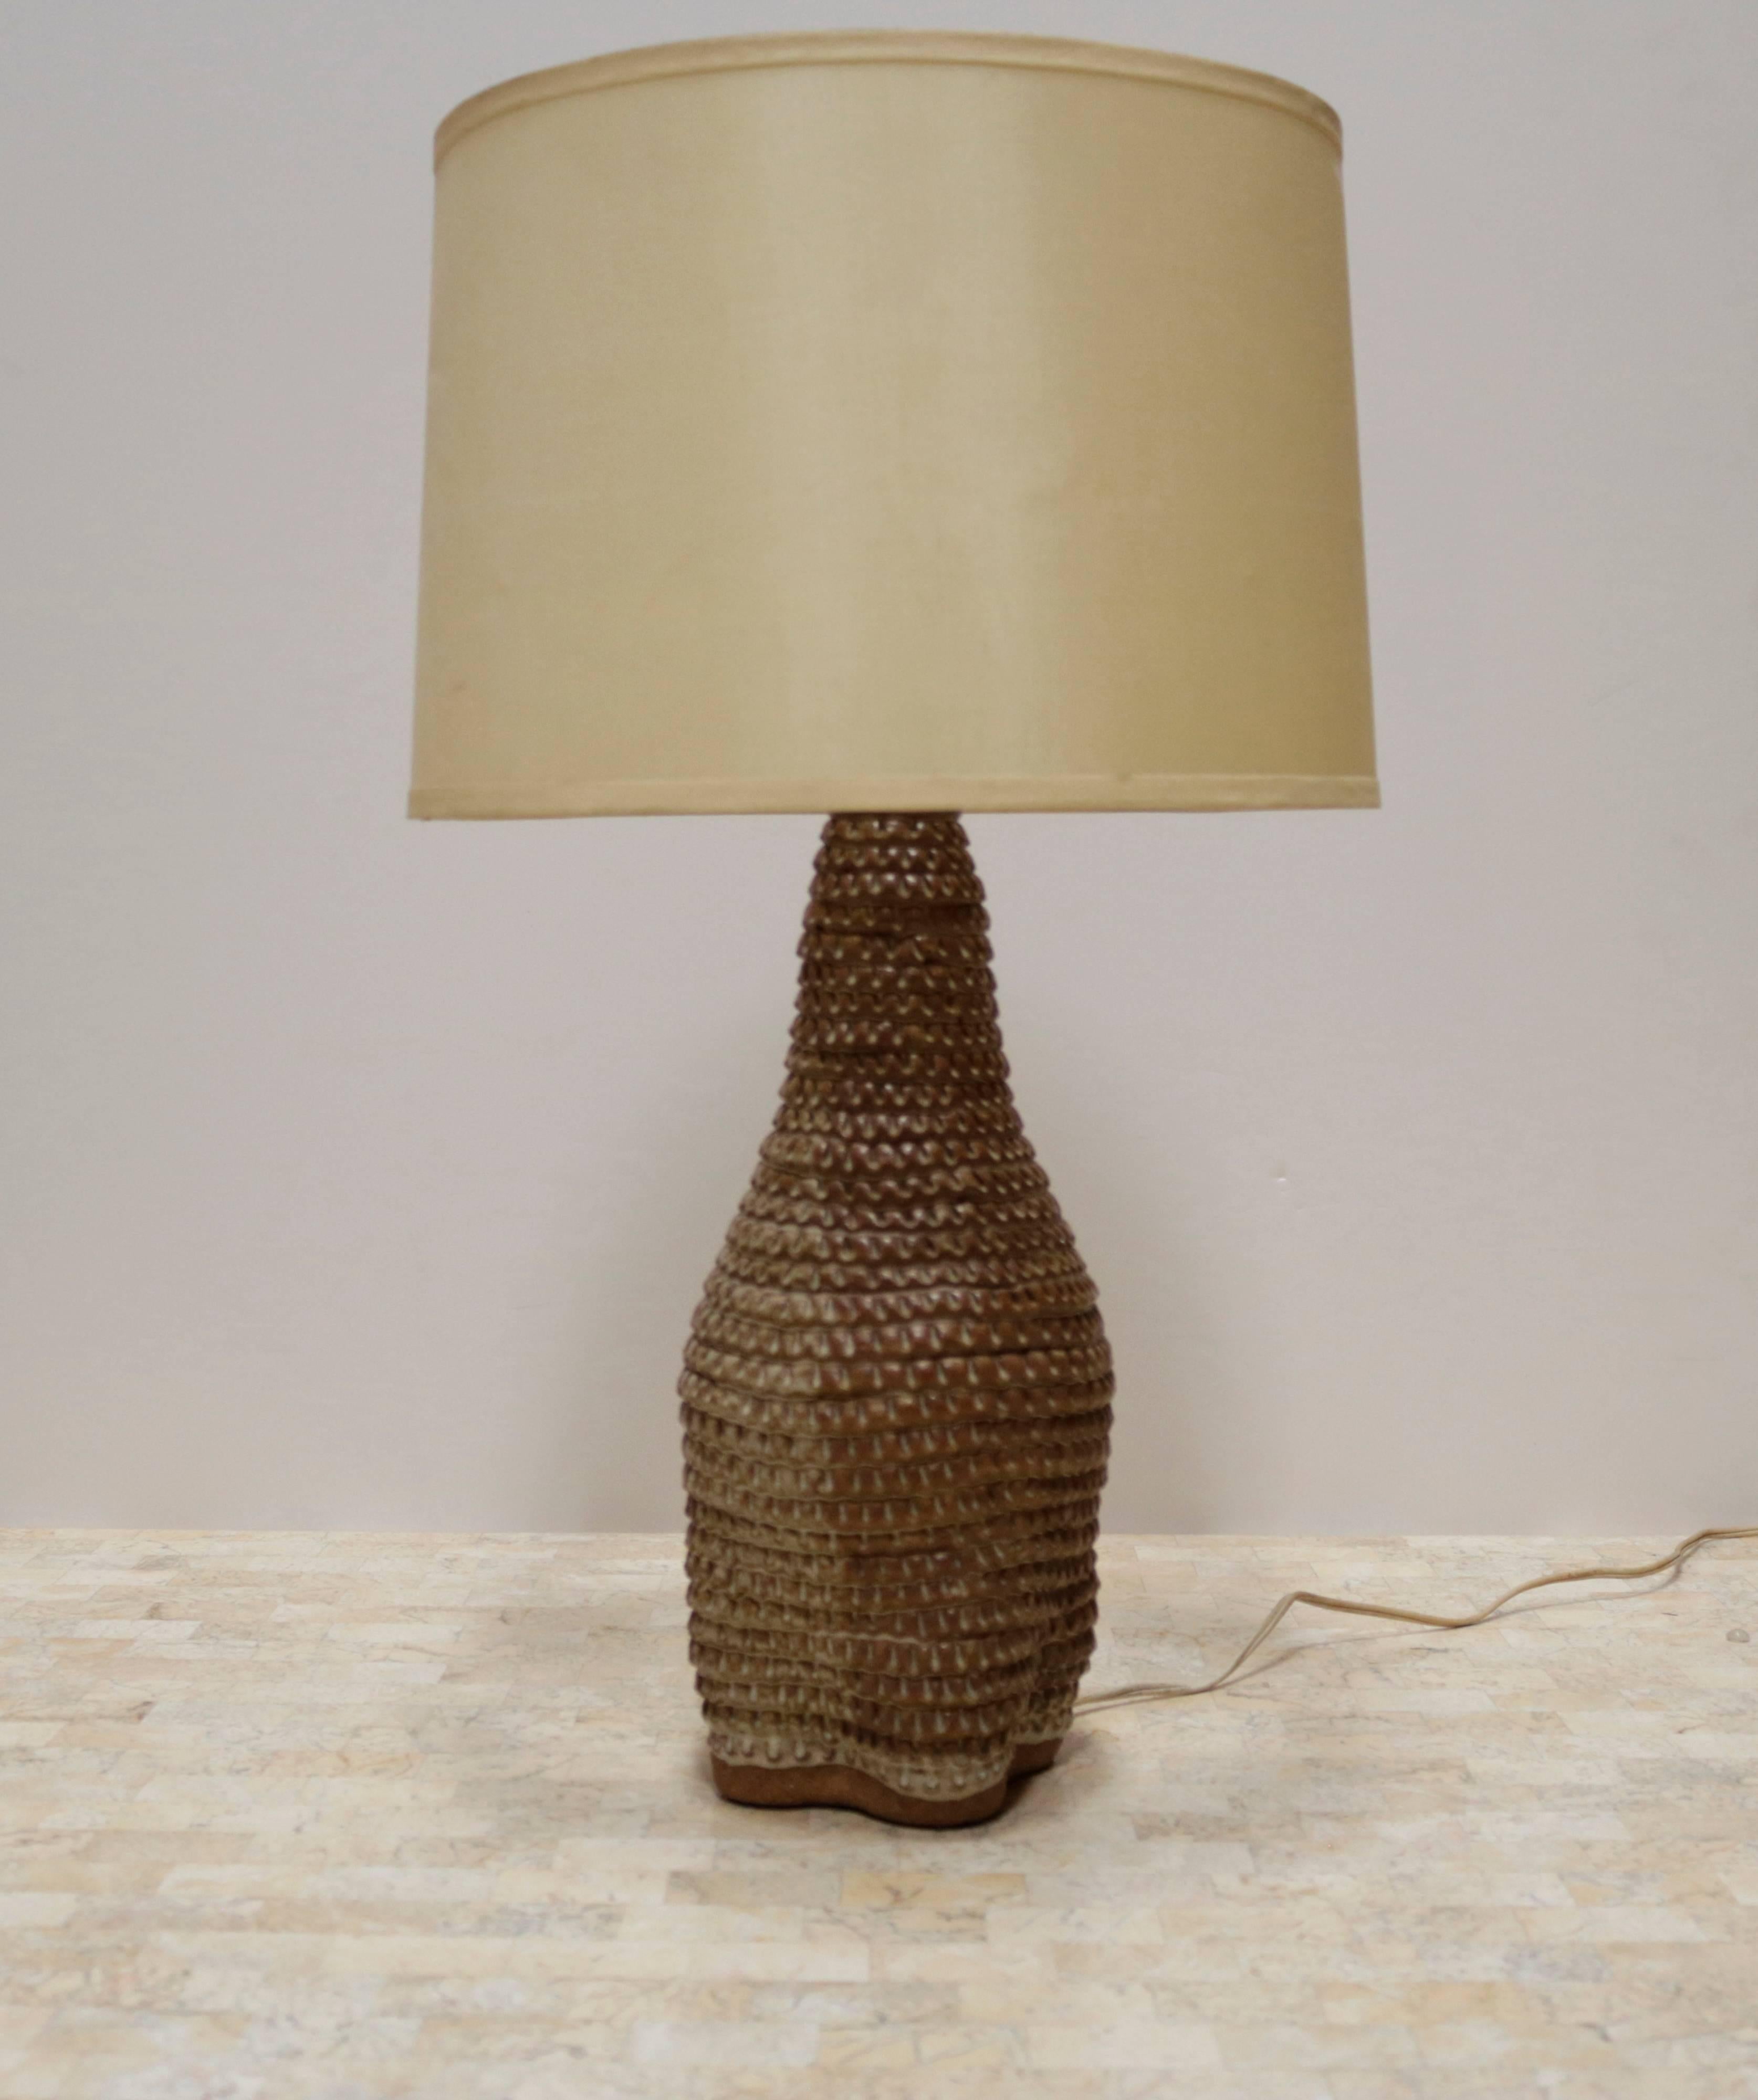 Tan ceramic California table lamp. Highly textured surface has a corrugated effect. Comes with original shade. Signed on the bottom 